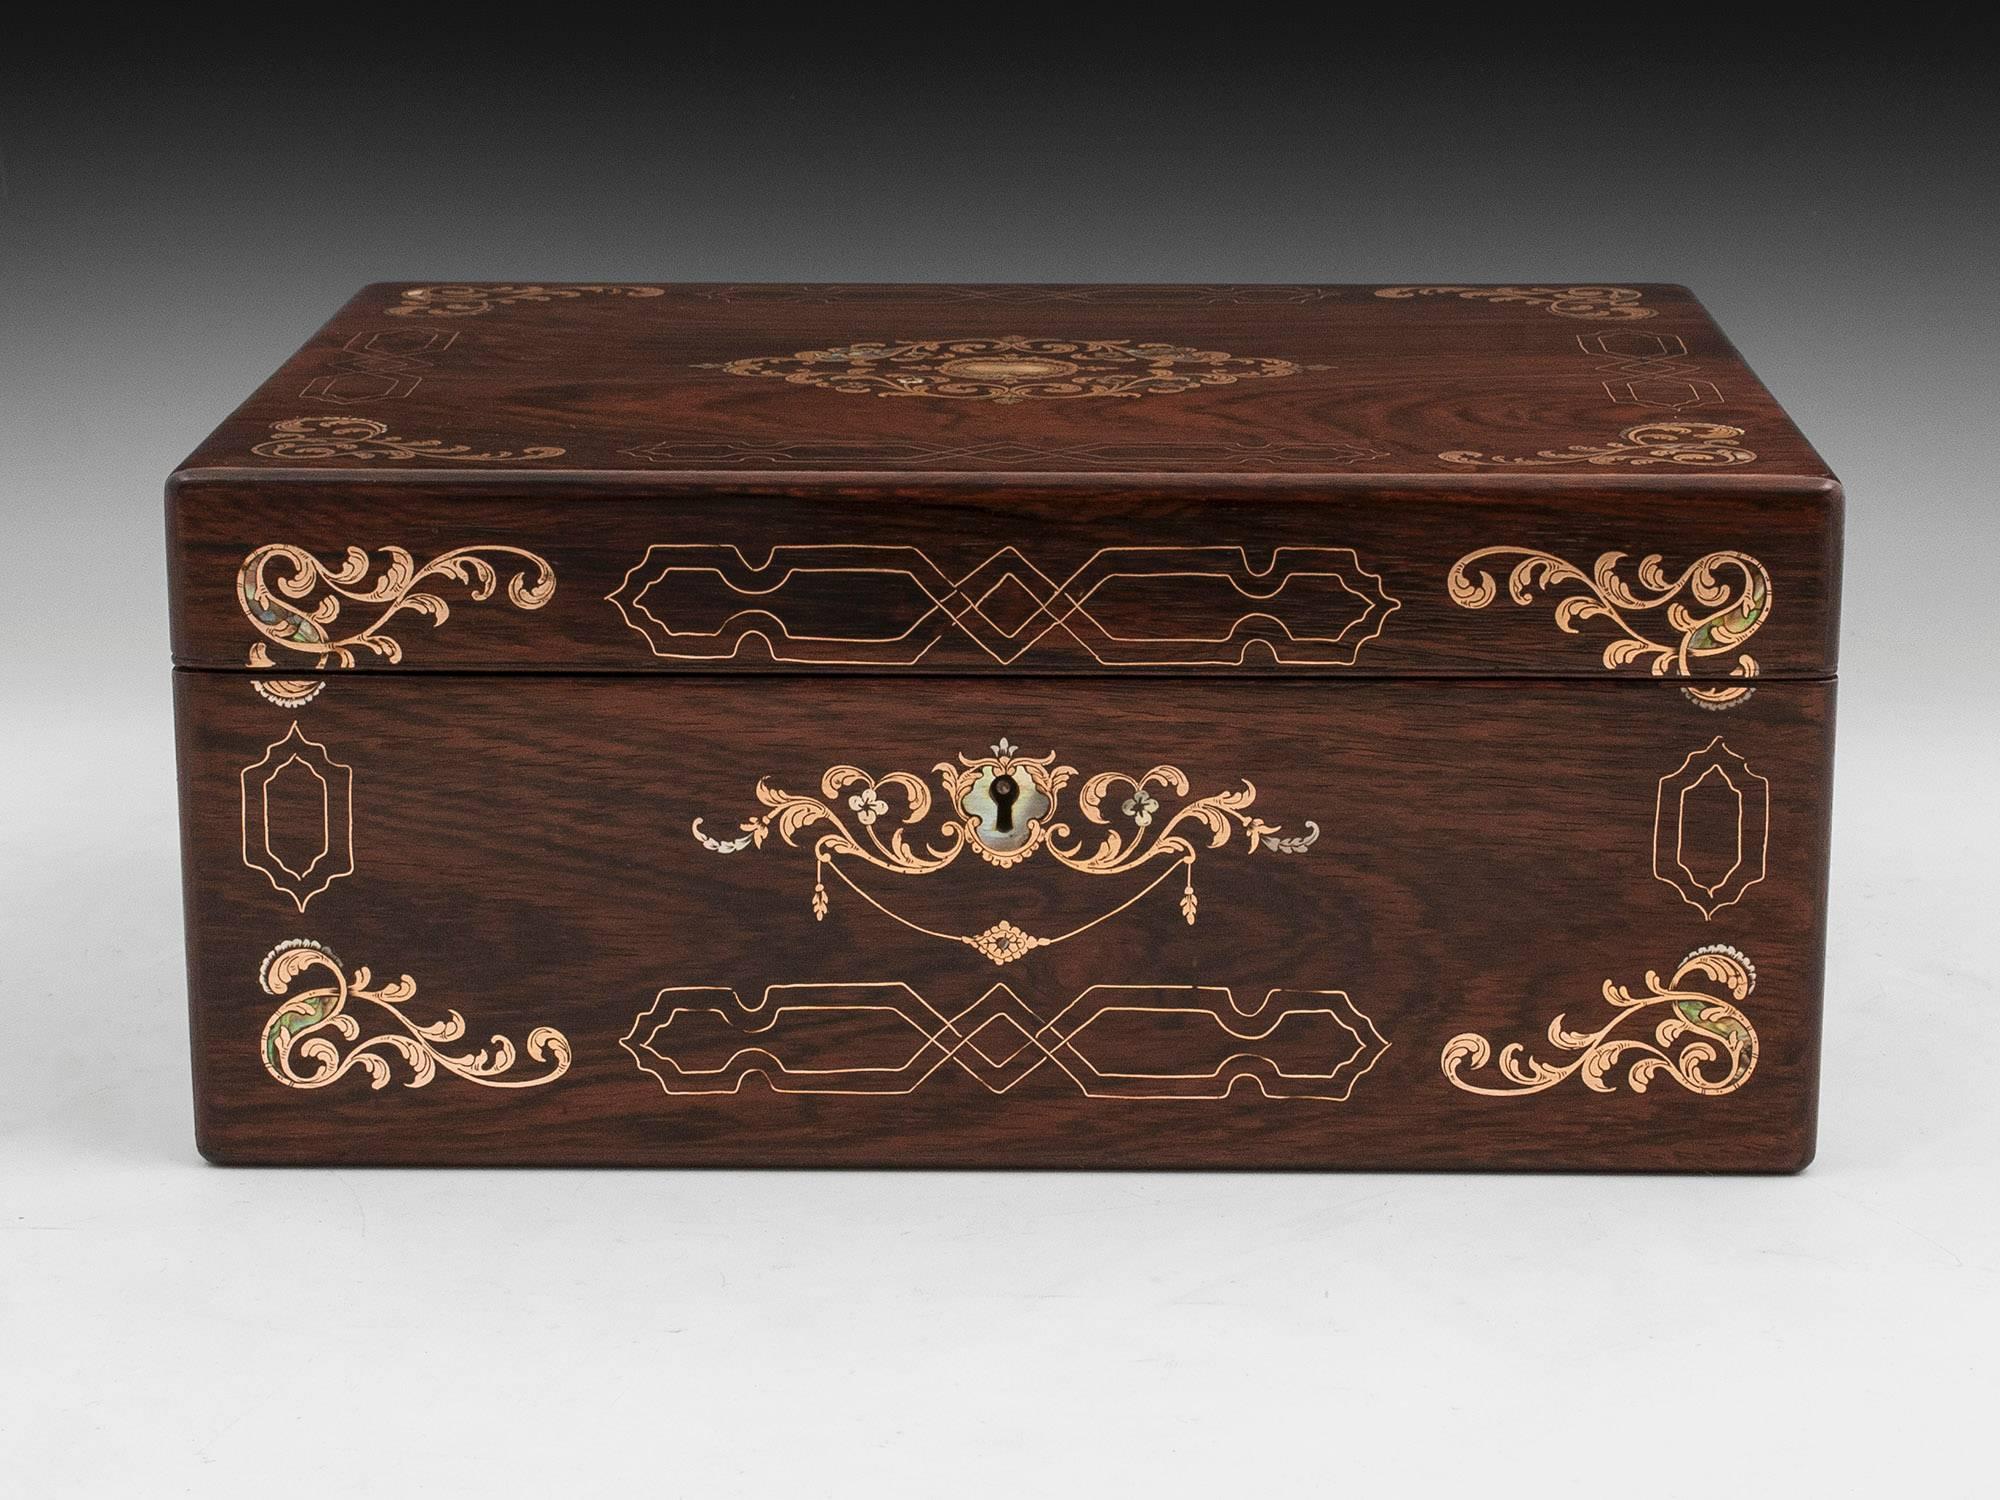 Rosewood sewing box with exquisite inlaid designs of brass, pewter and Mother of Pearl. 

The interior is lined in blue silk and silver paper. Featuring a silk backed ruched lid and a removable tray which contains several compartments including